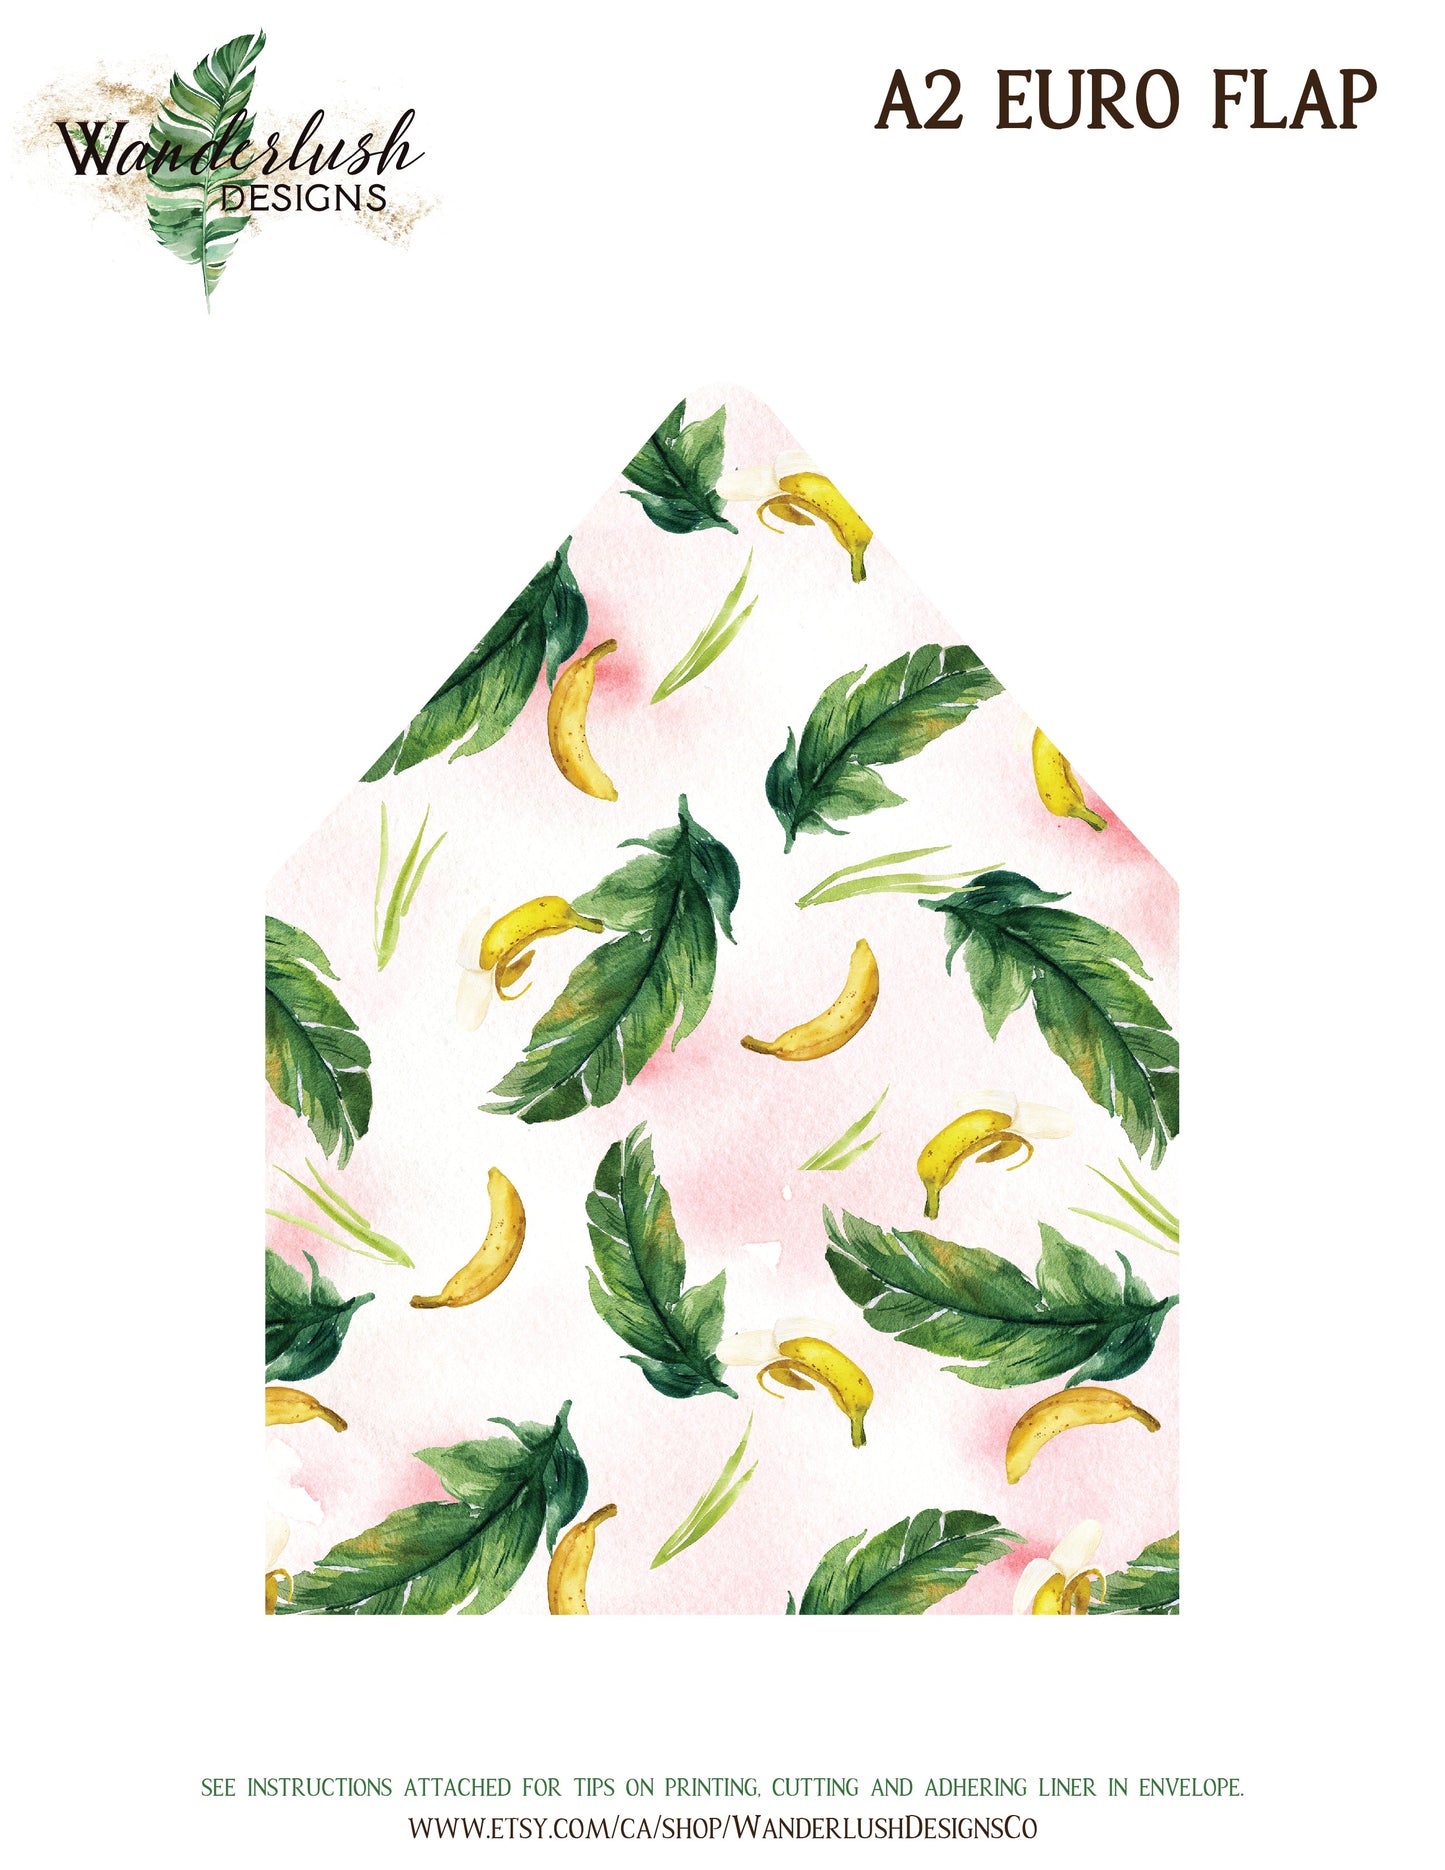 Tropical Floral Watercolor A7 & A2 Euro Flap Envelope Liners 7 Digital "Instant Download" - 'TROPICAL LUSH"